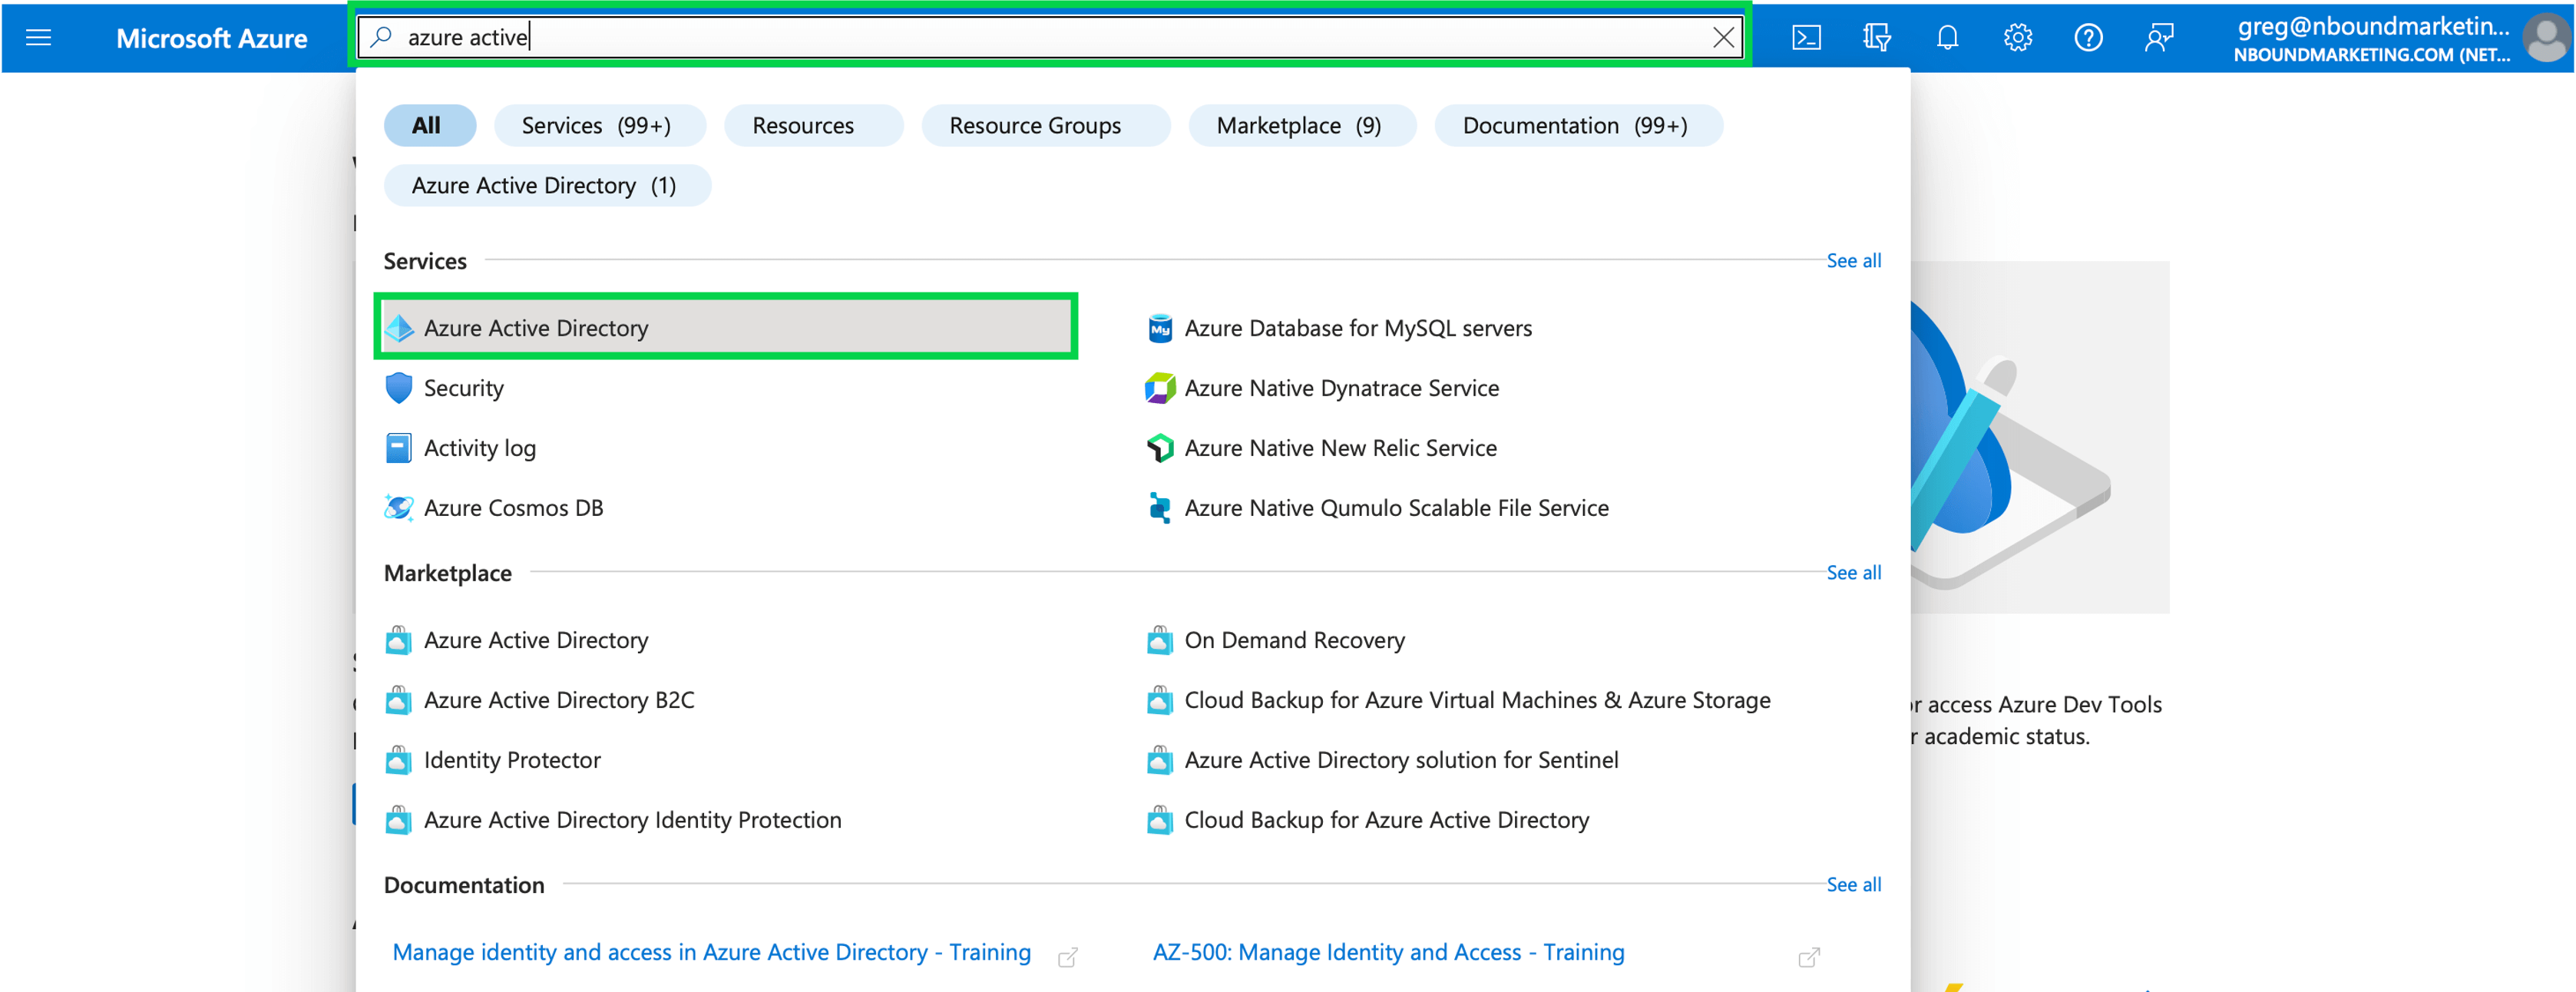 Sign in to Azure AD